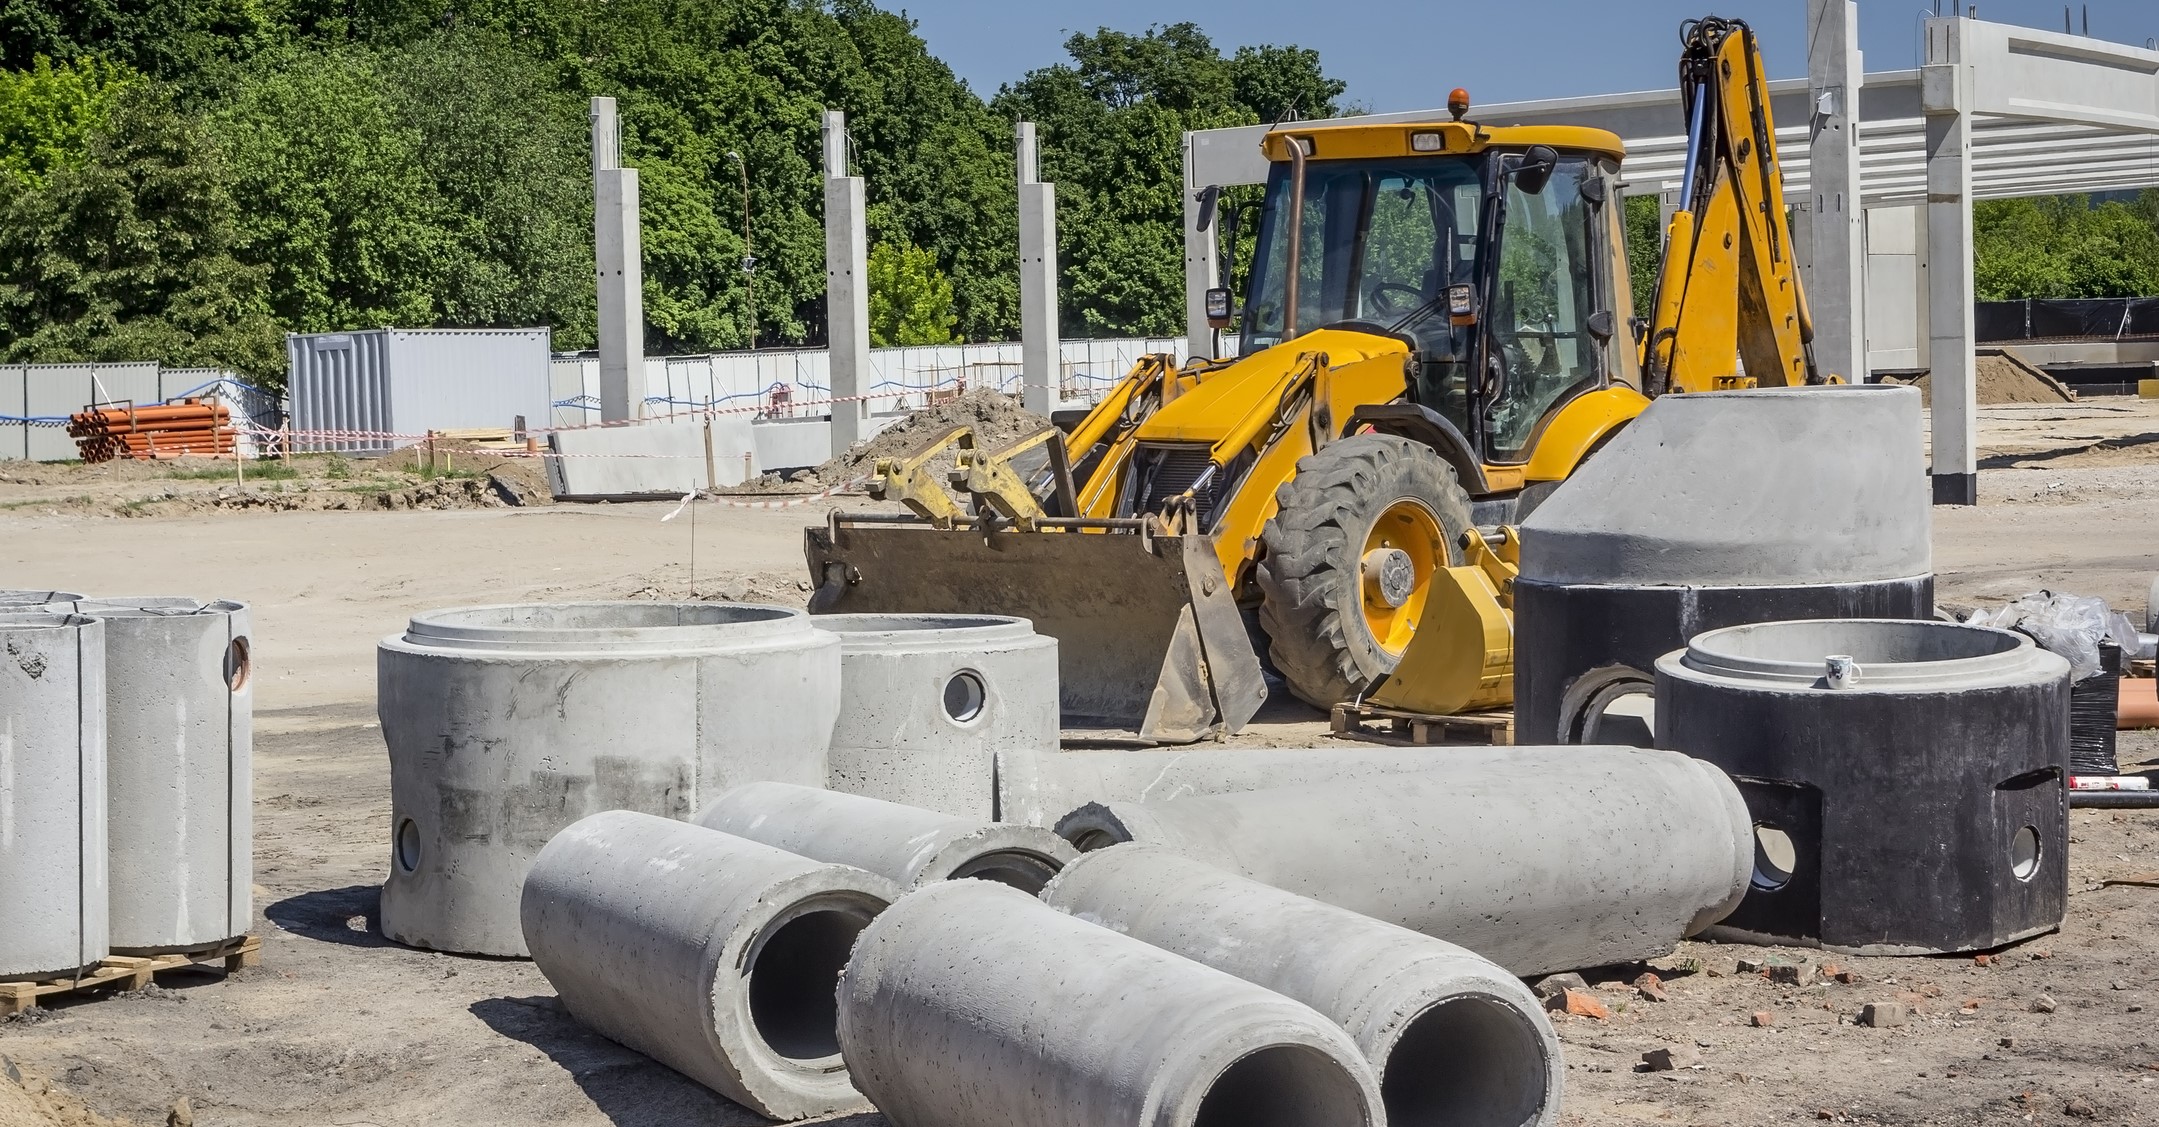 Concrete drainage pipes, earth mover and concrete warehouse in background